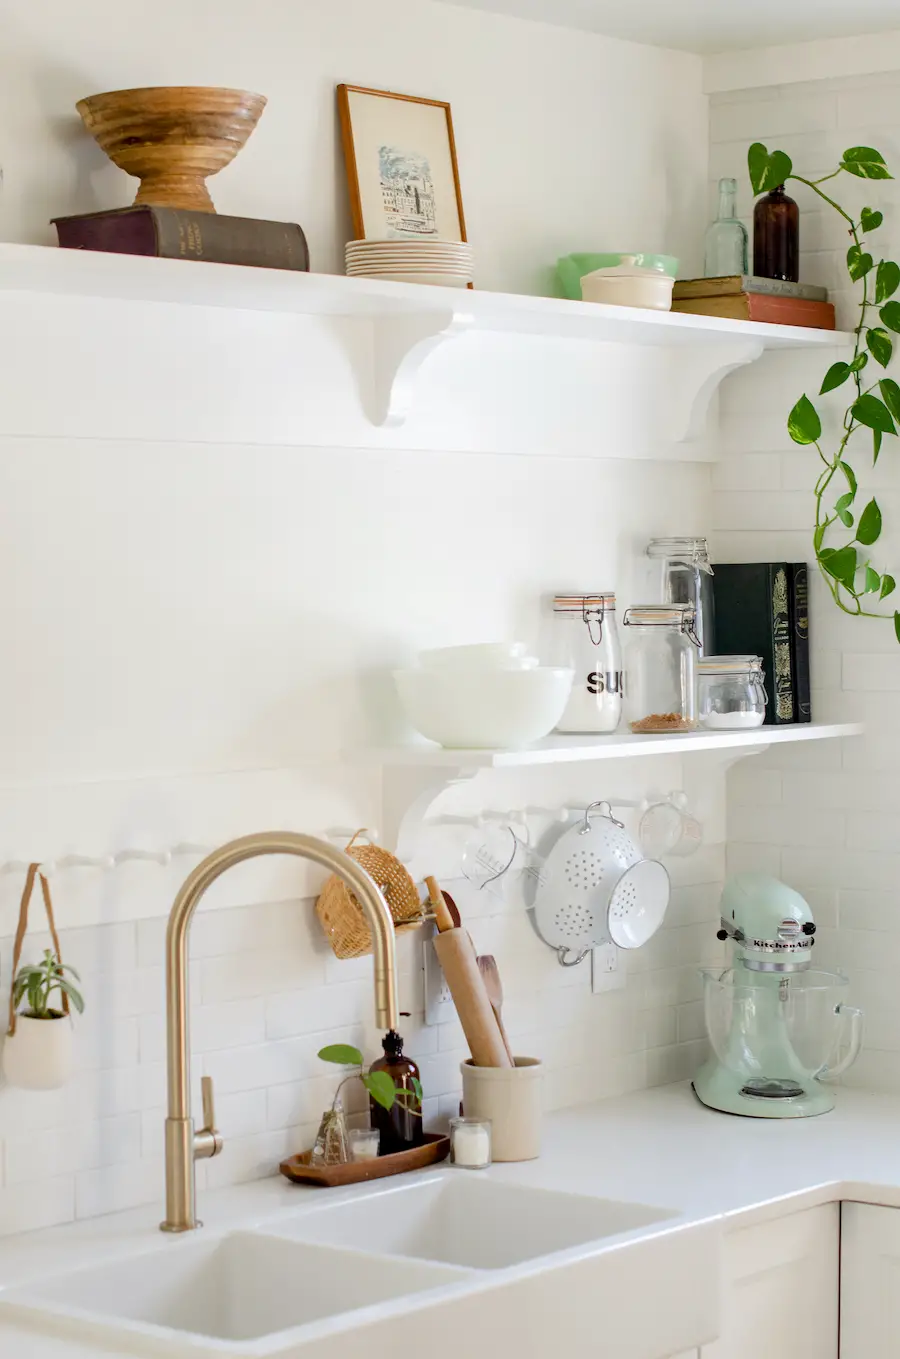 Kitchen Shelf Styling Tips (and budget finds!) - Jenna Sue Design